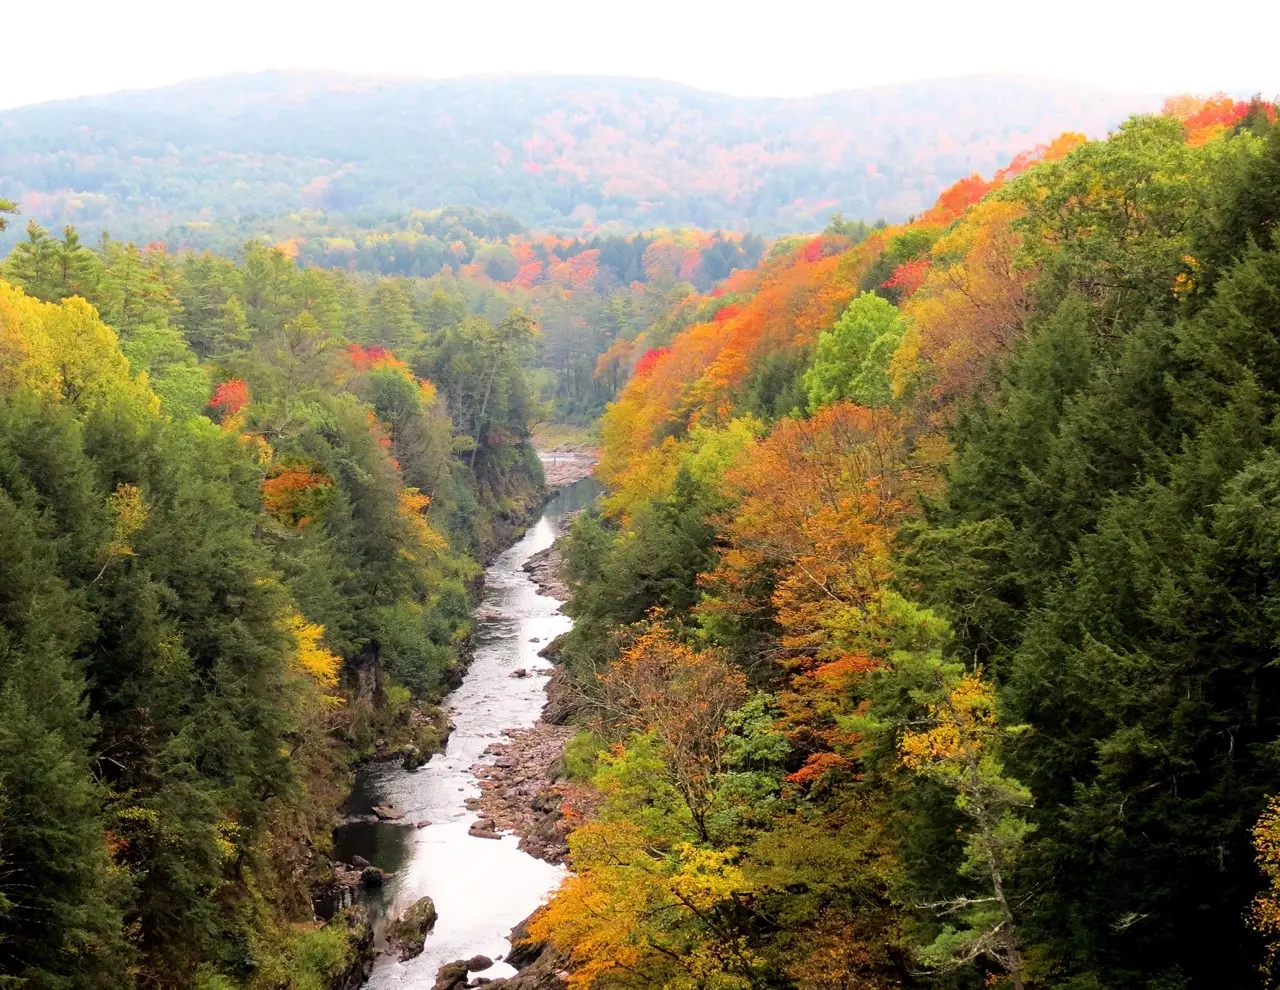 Fall foliage view of Vermont with a river